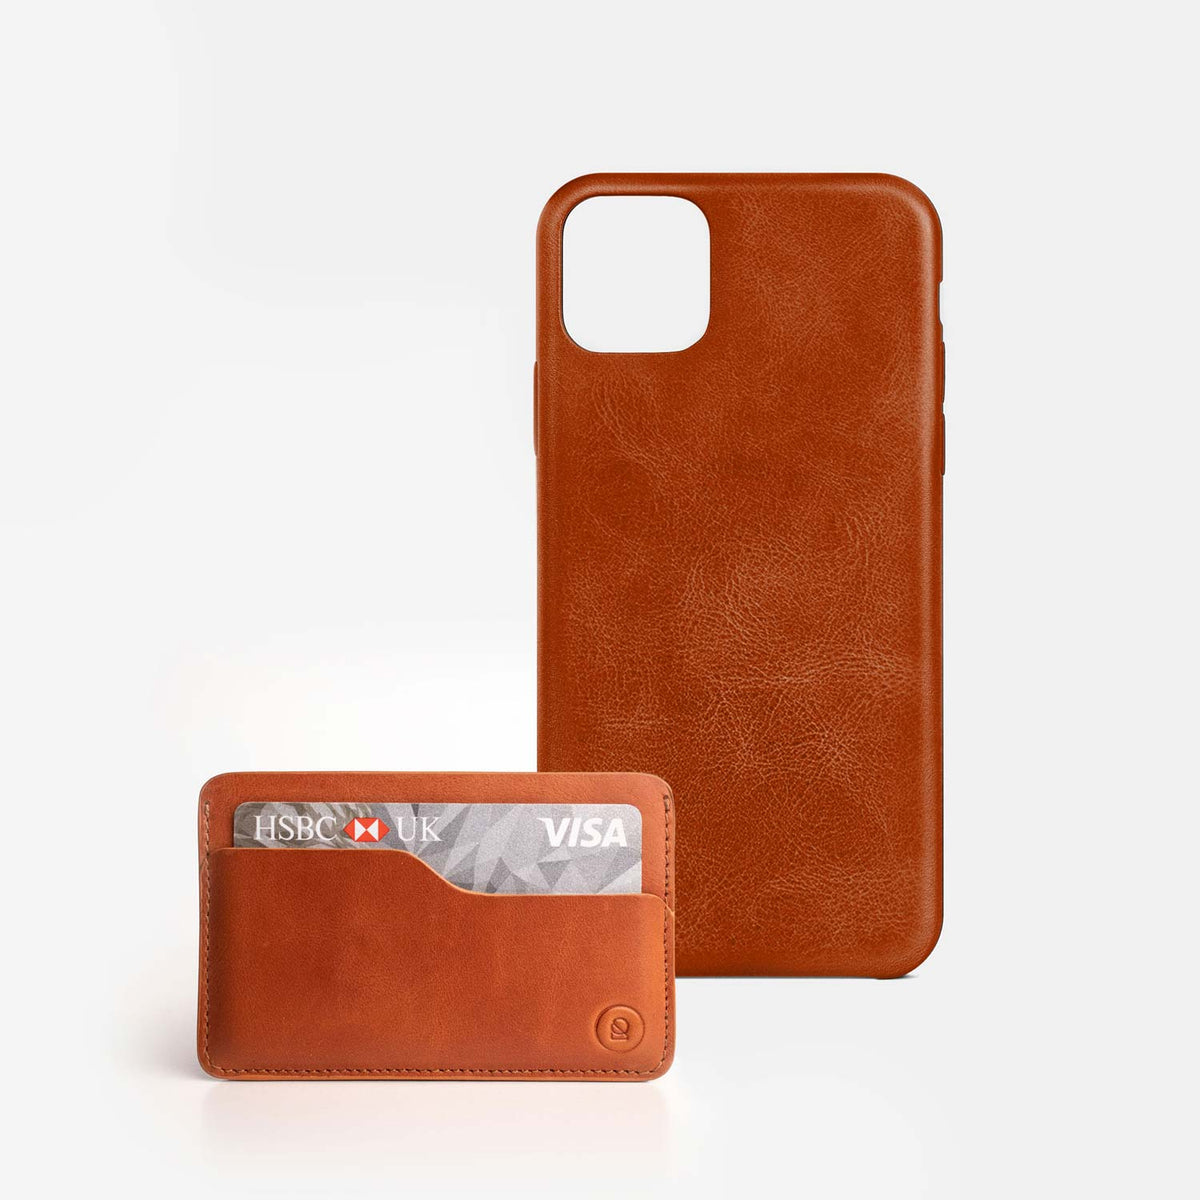 Leather iPhone Xs Max Shell Case - Saddle Brown - RYAN London